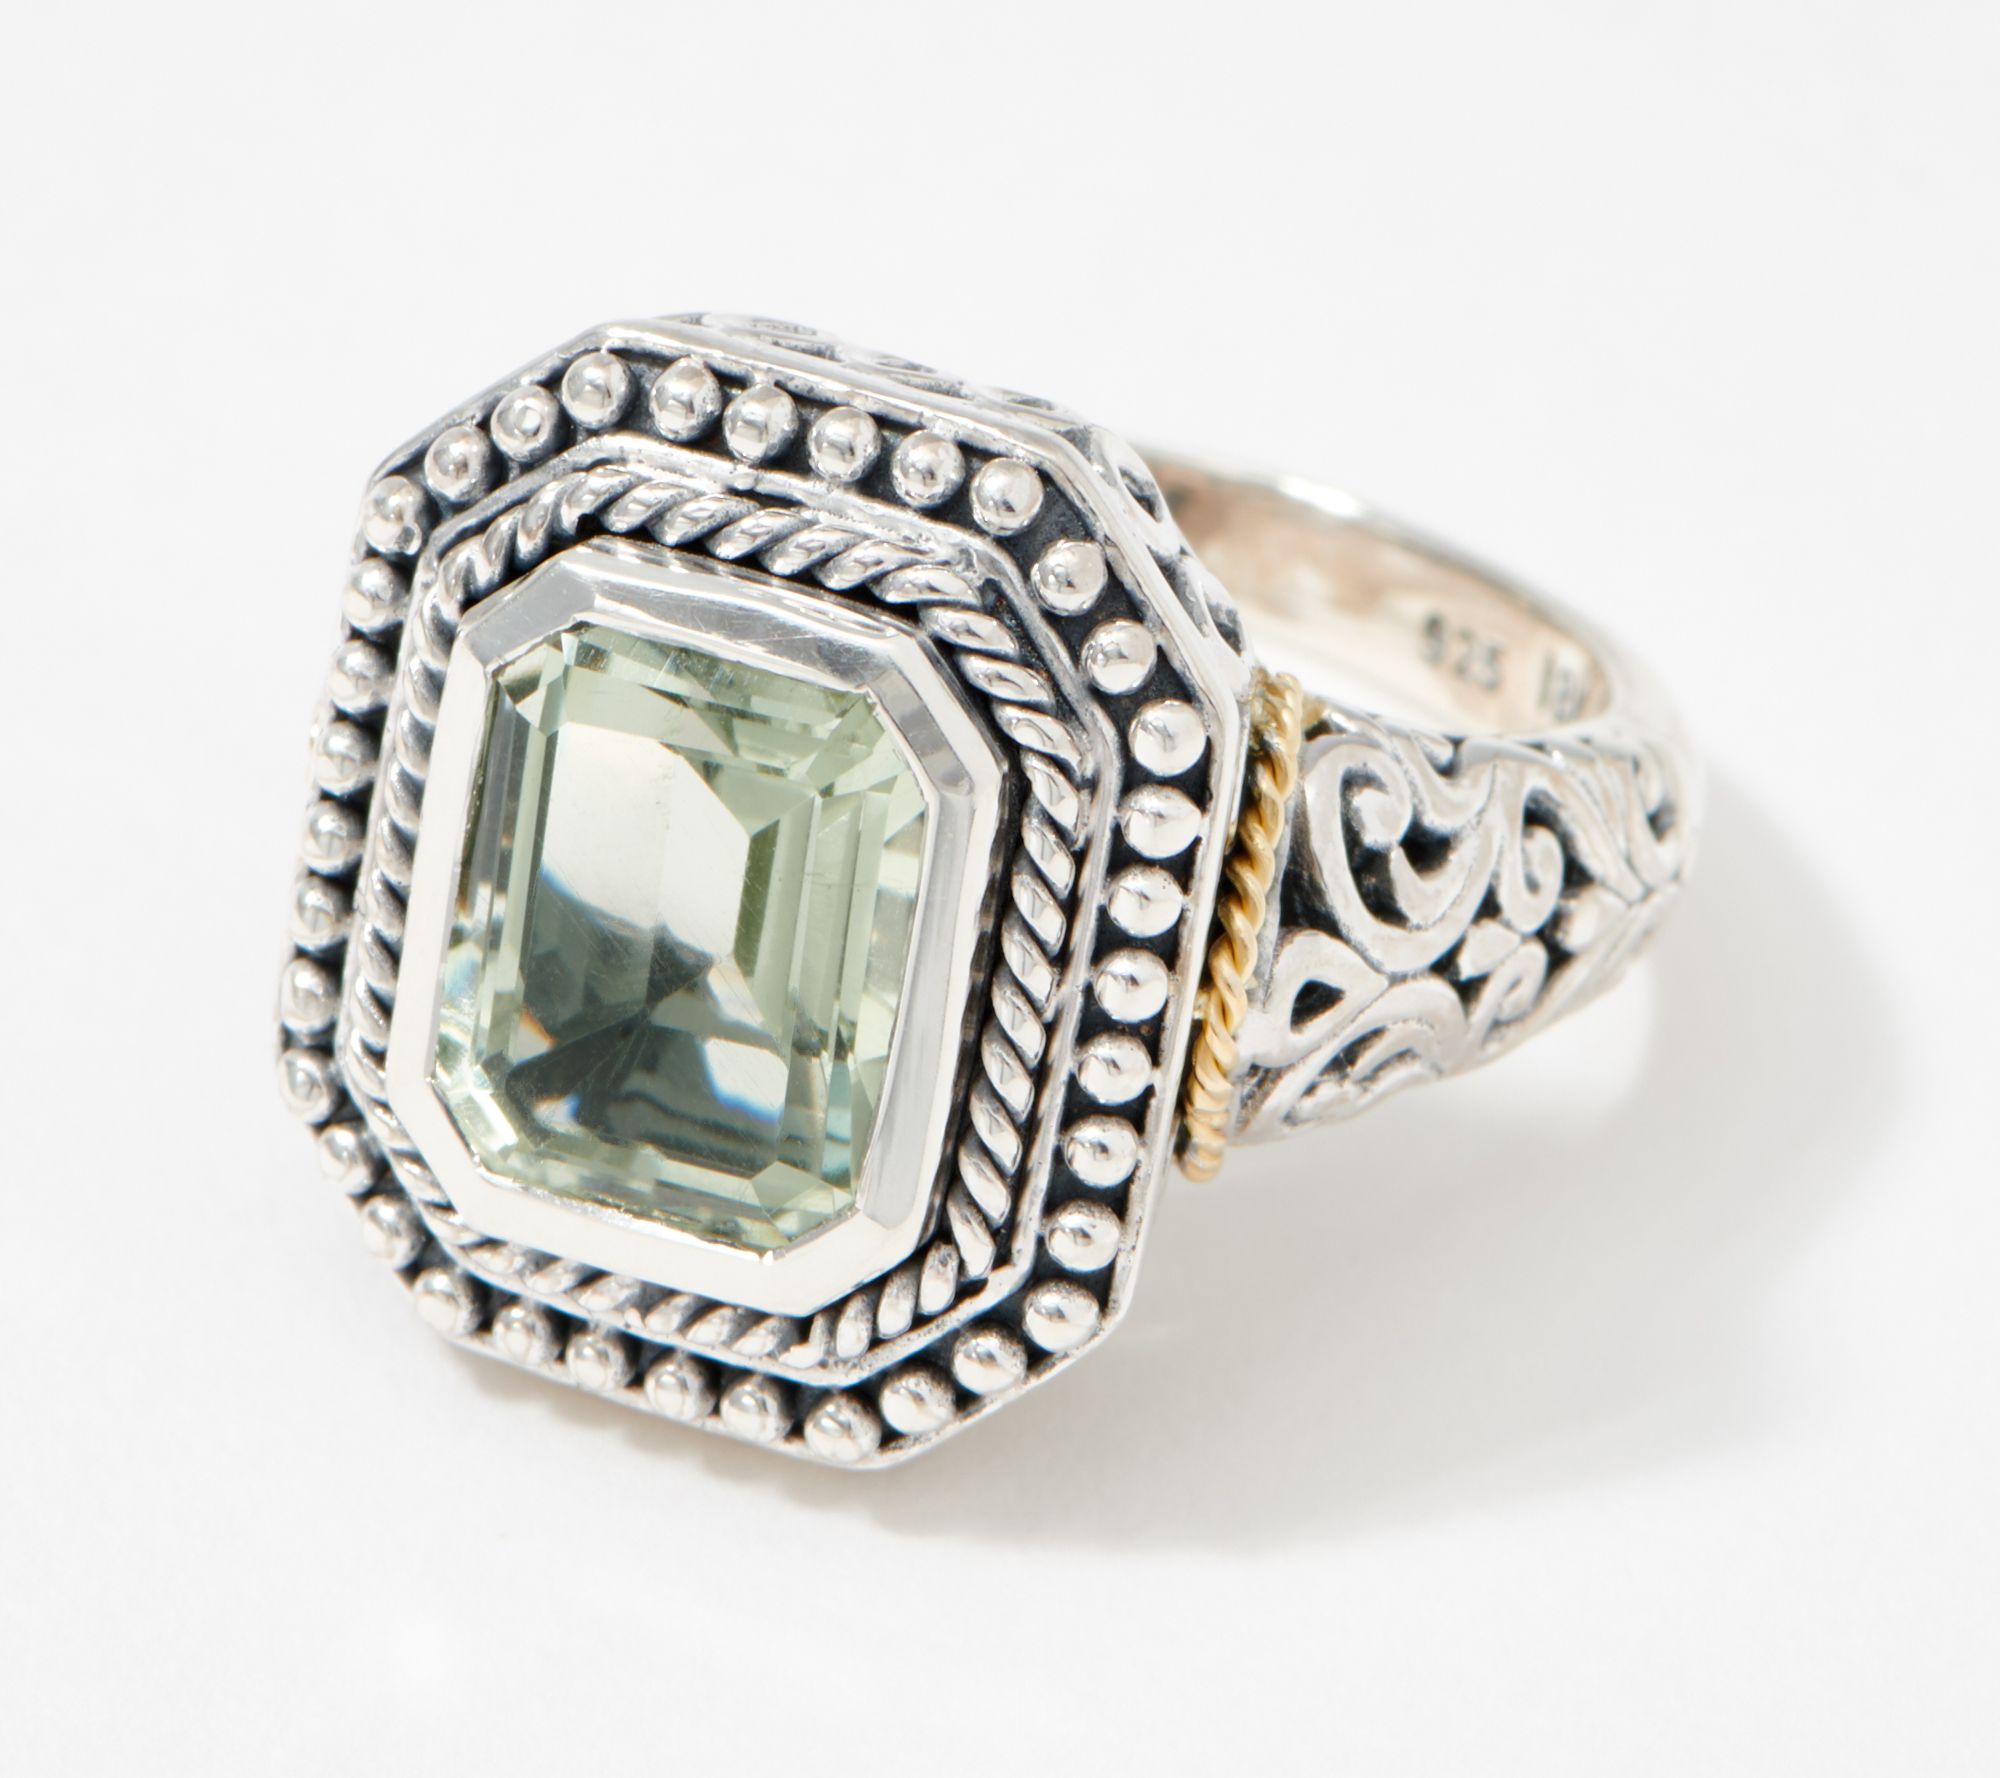 Artisan Crafted Emerald Cut Gemstone Ring Sterling Silver & 18K Gold ...